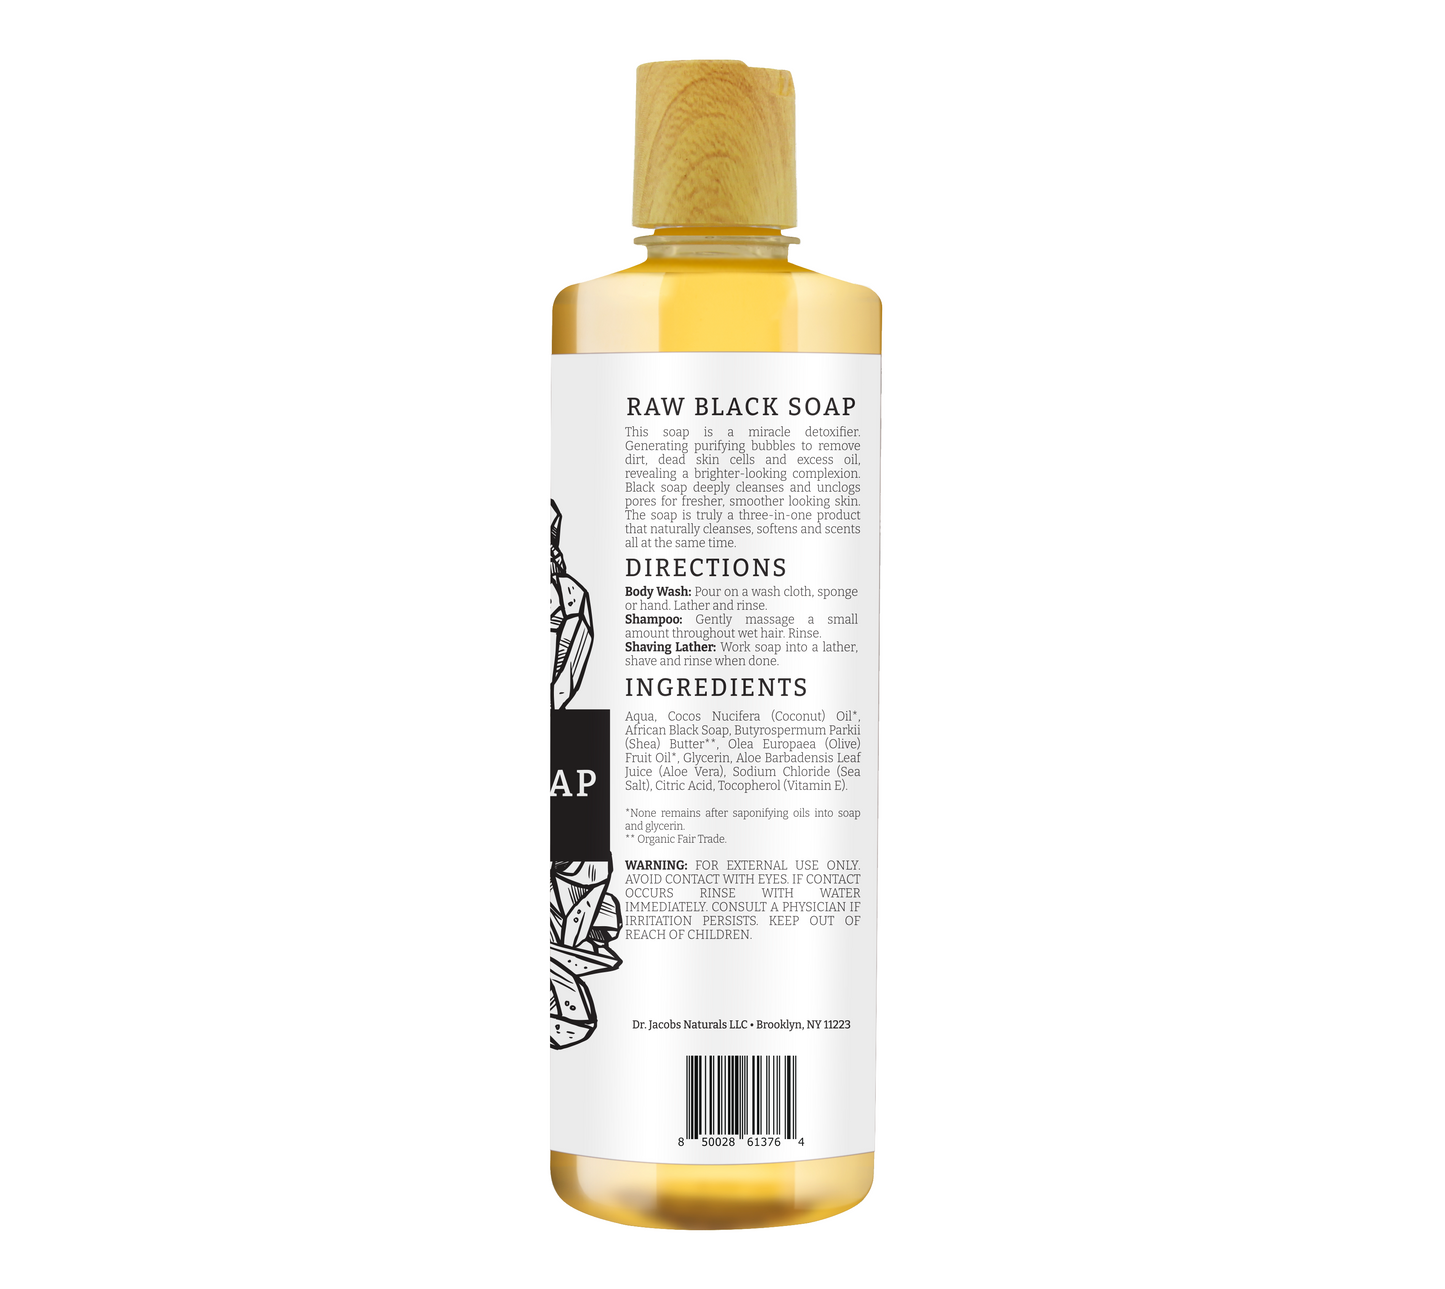 Raw Black Soap by Dr. Jacobs Naturals